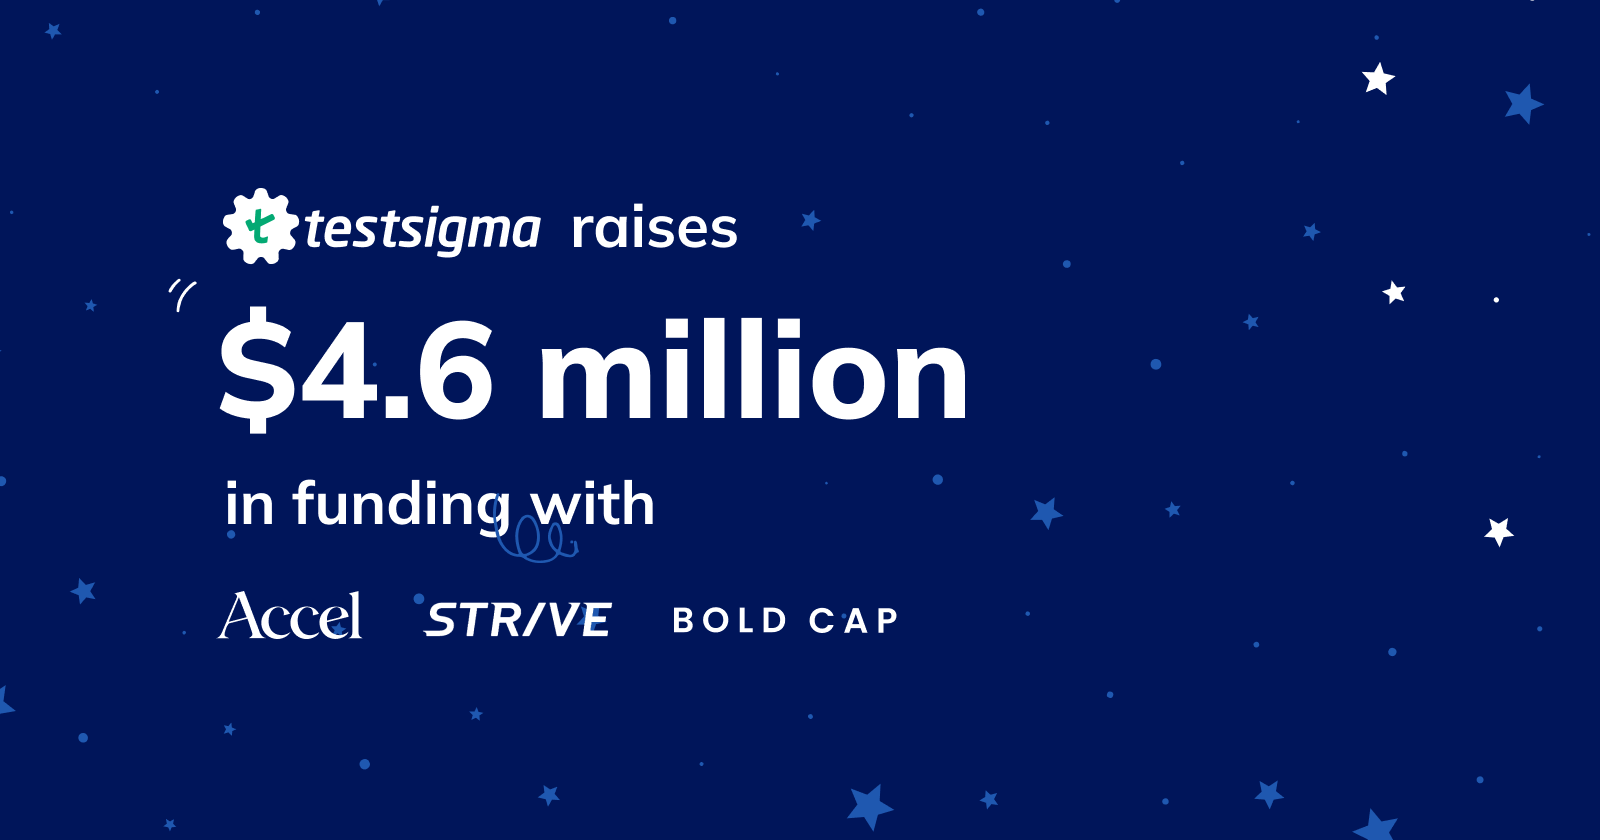 Testsigma raises $4.6M from Accel and STRIVE to simplify test automation for everyone